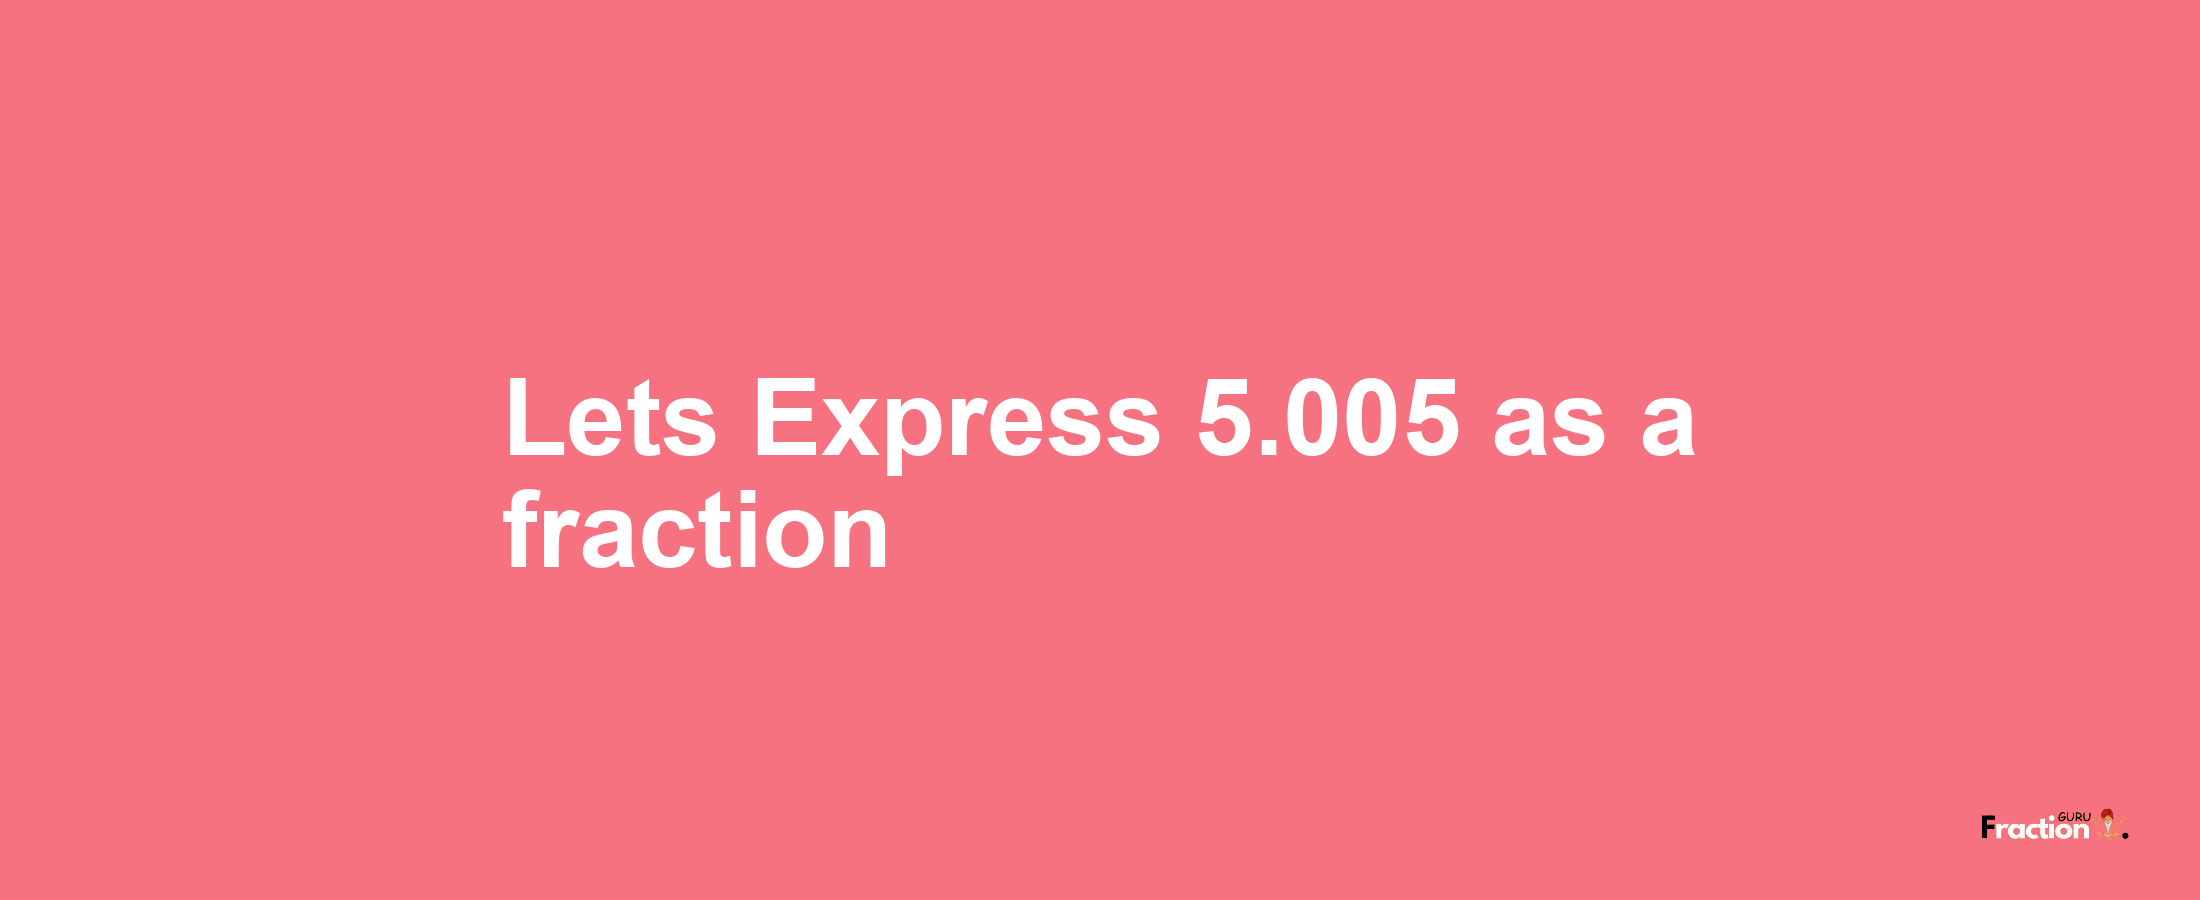 Lets Express 5.005 as afraction